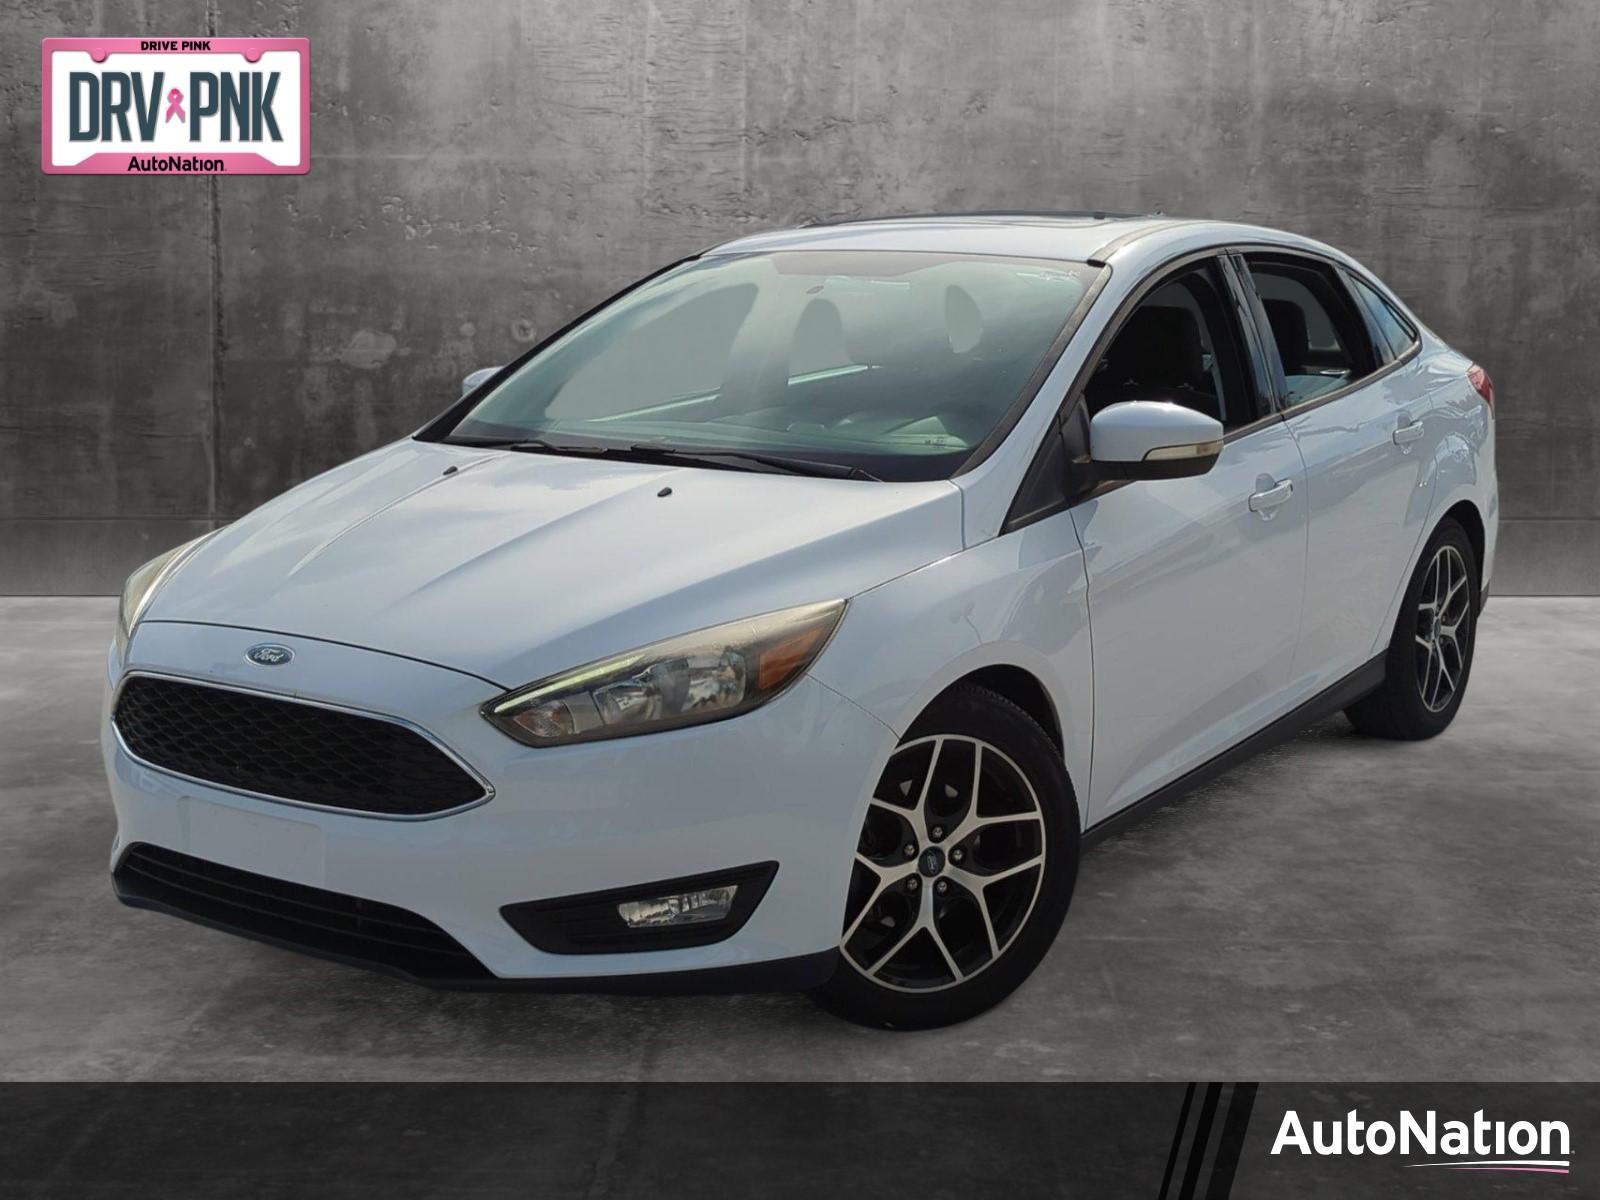 2018 Ford Focus Vehicle Photo in Pembroke Pines, FL 33027